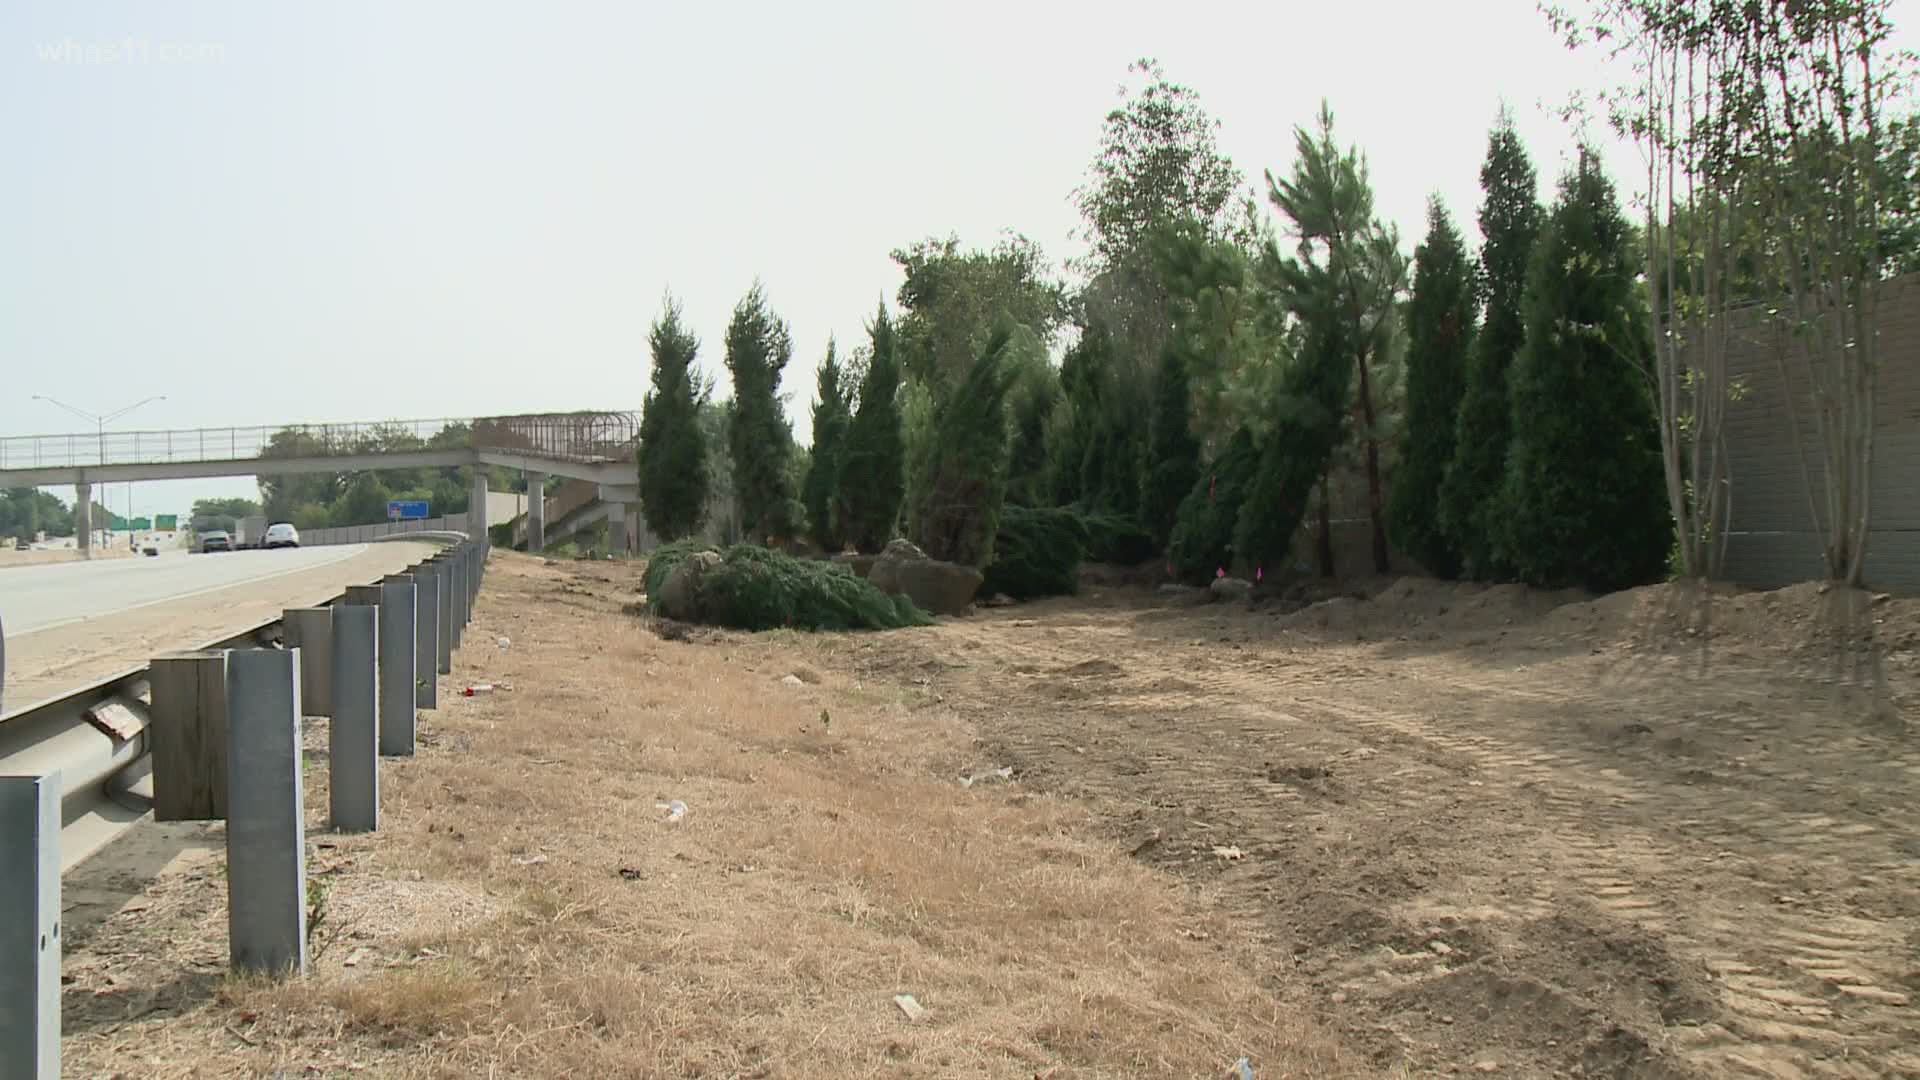 Hundreds of trees have taken root in south Louisville. The group plans to have more plantings on the way in early 2021.